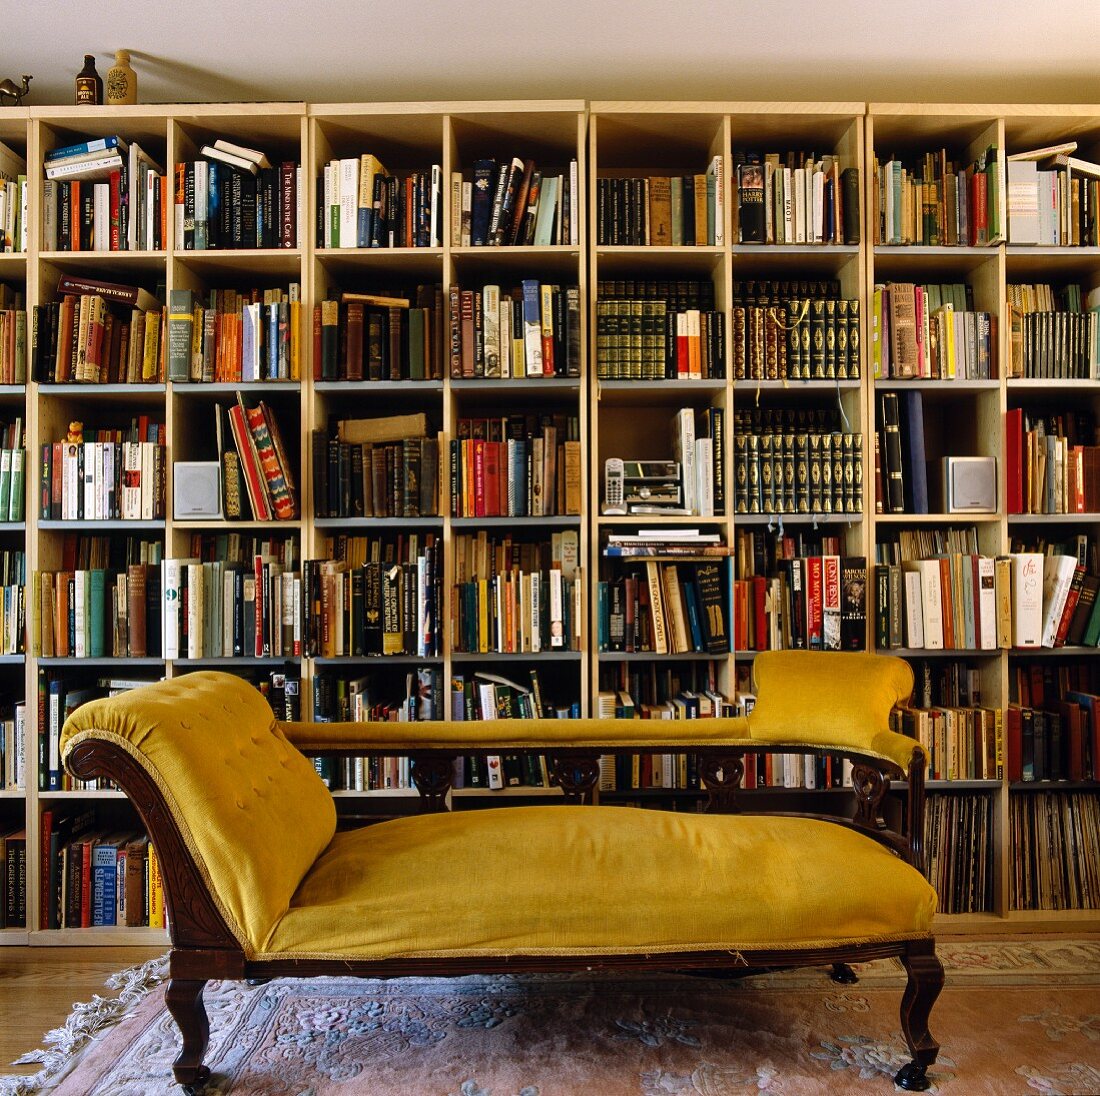 Antique divan upholstered in yellow velvet in front of a modern library wall